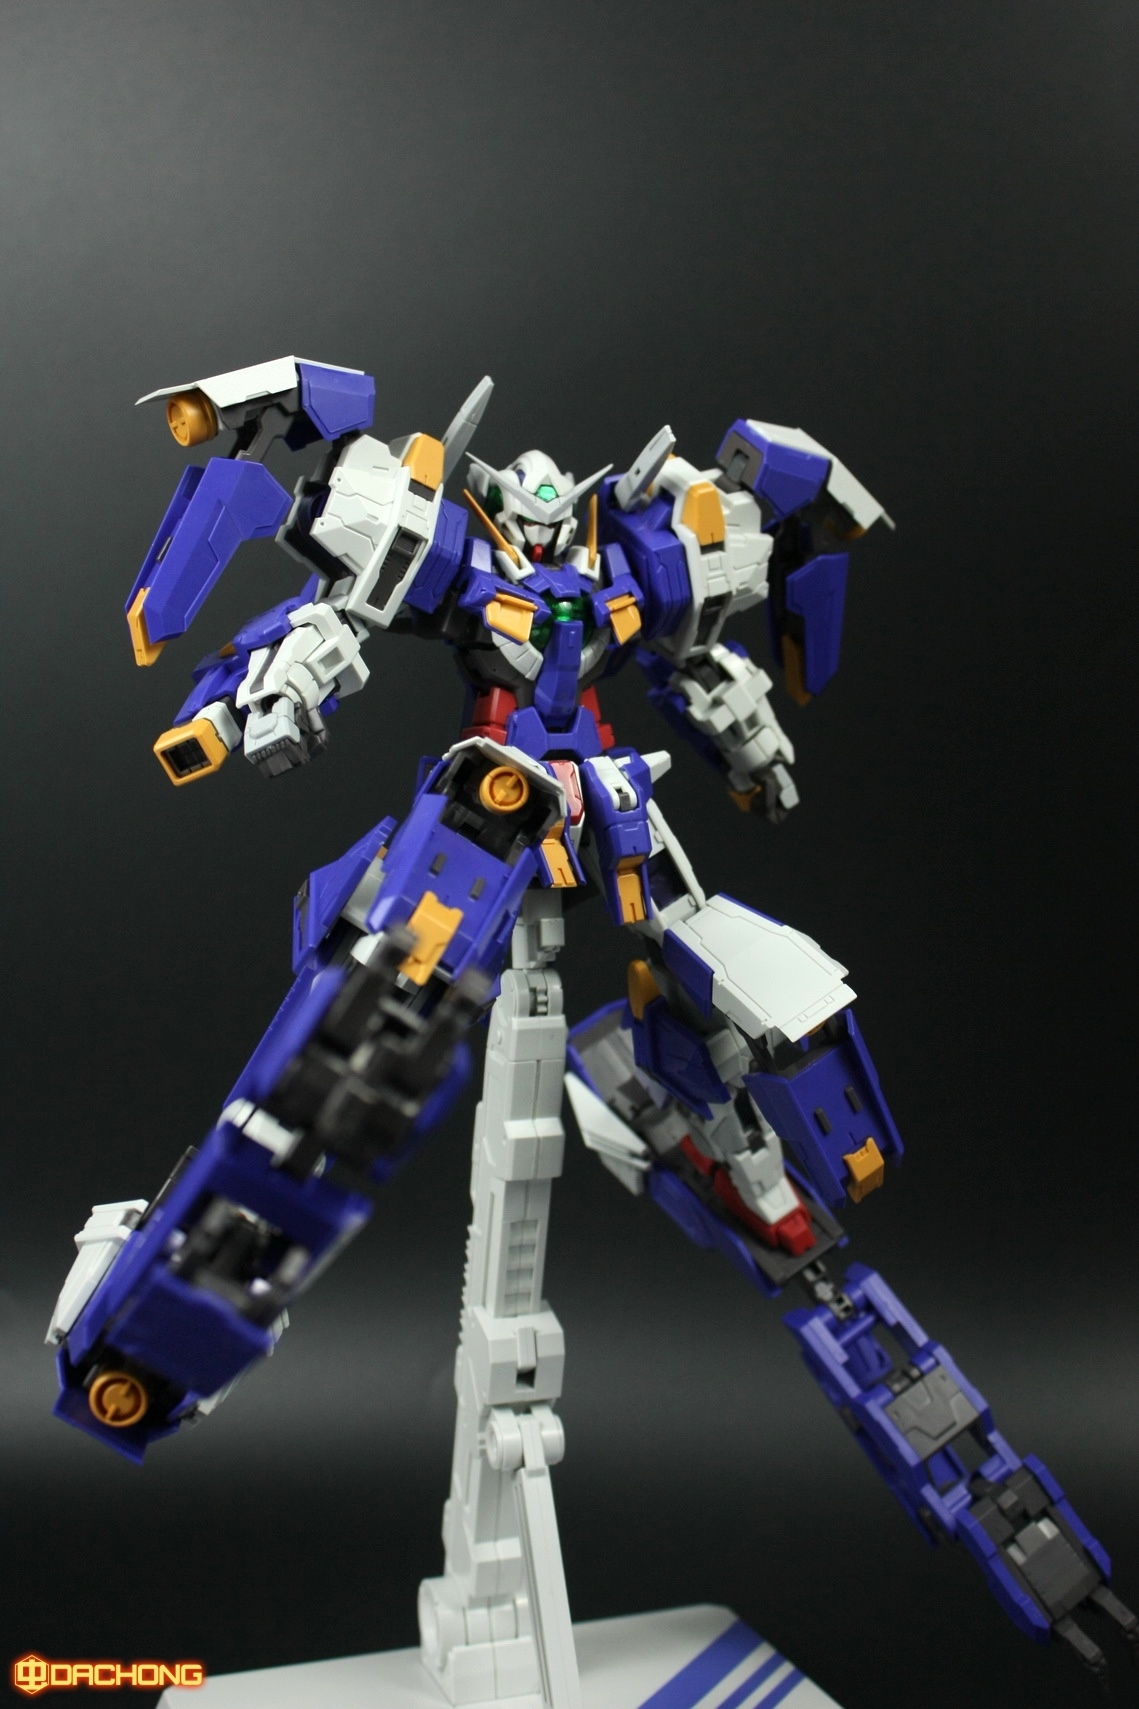 S254_MG_exia_HS_review_inask_091.jpg